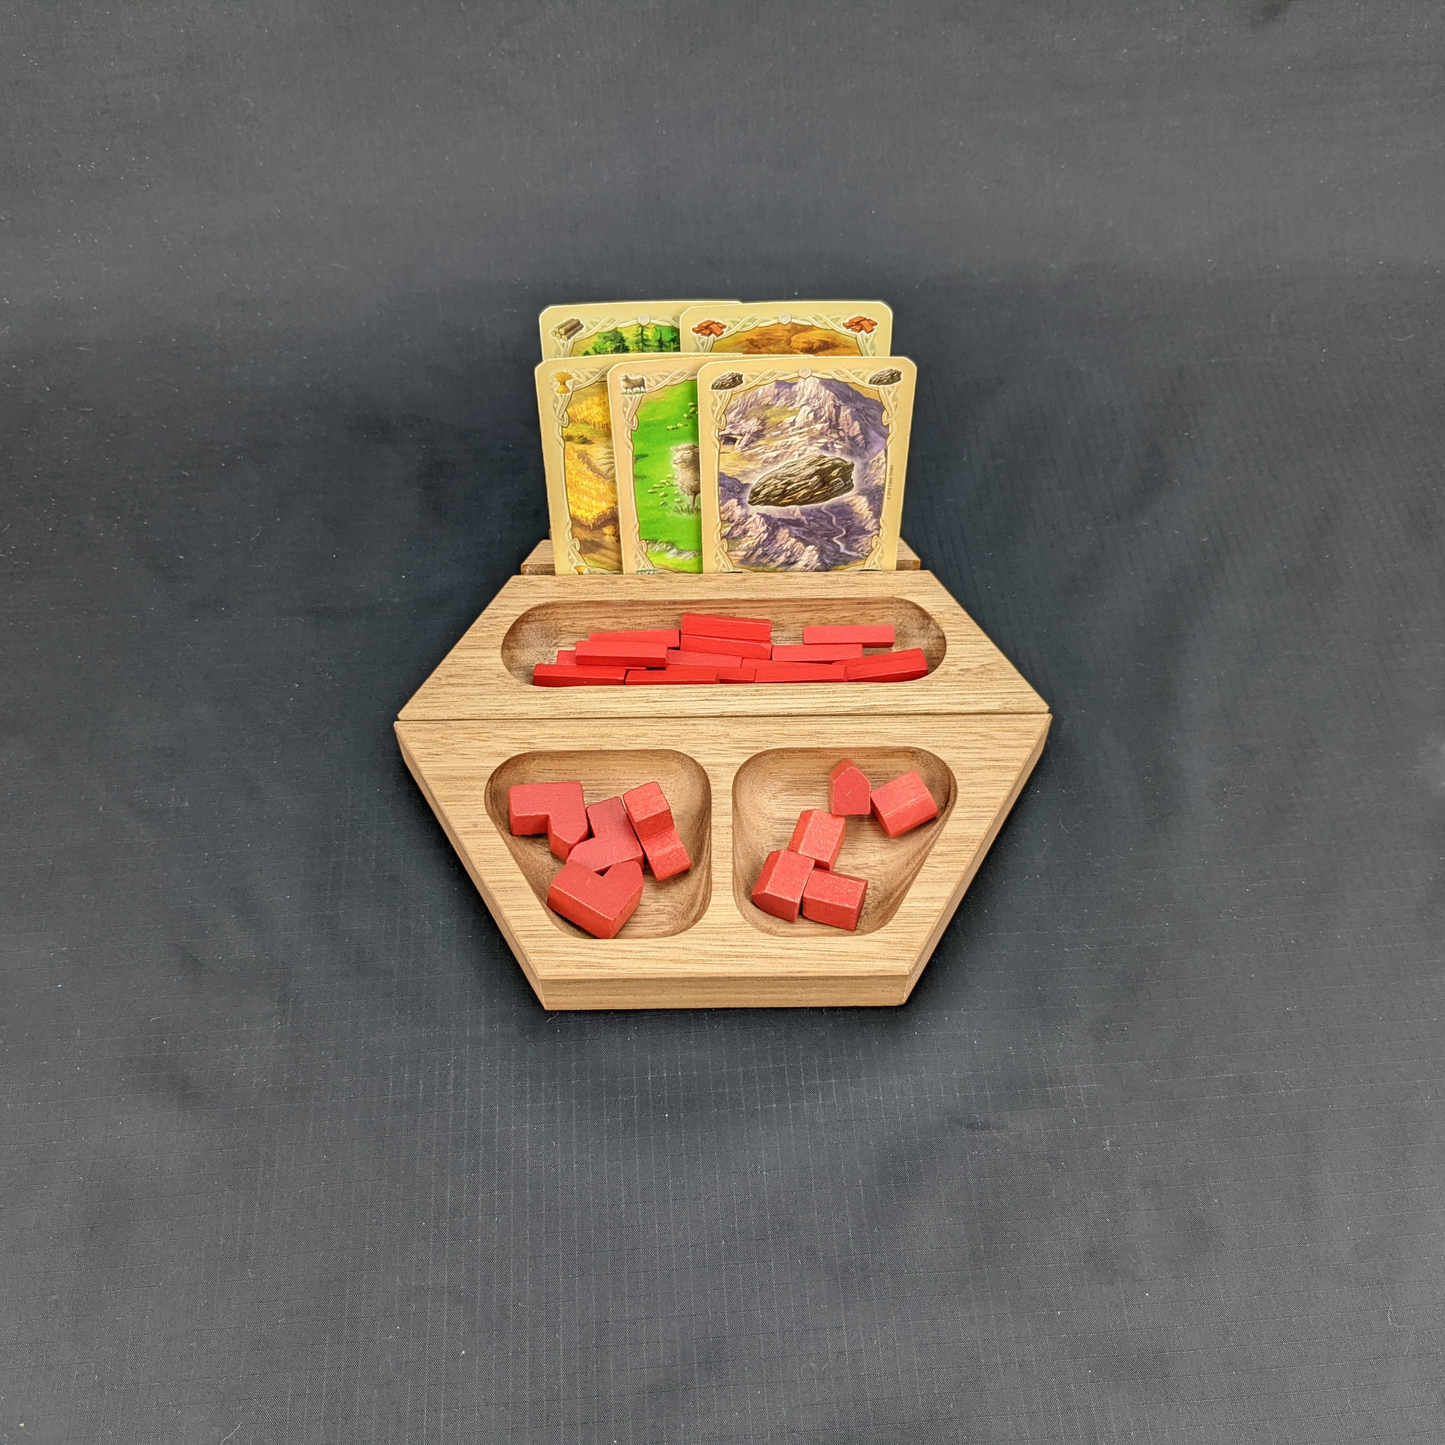 Magnetic Gaming Tile 2 - Dish and Card Slots